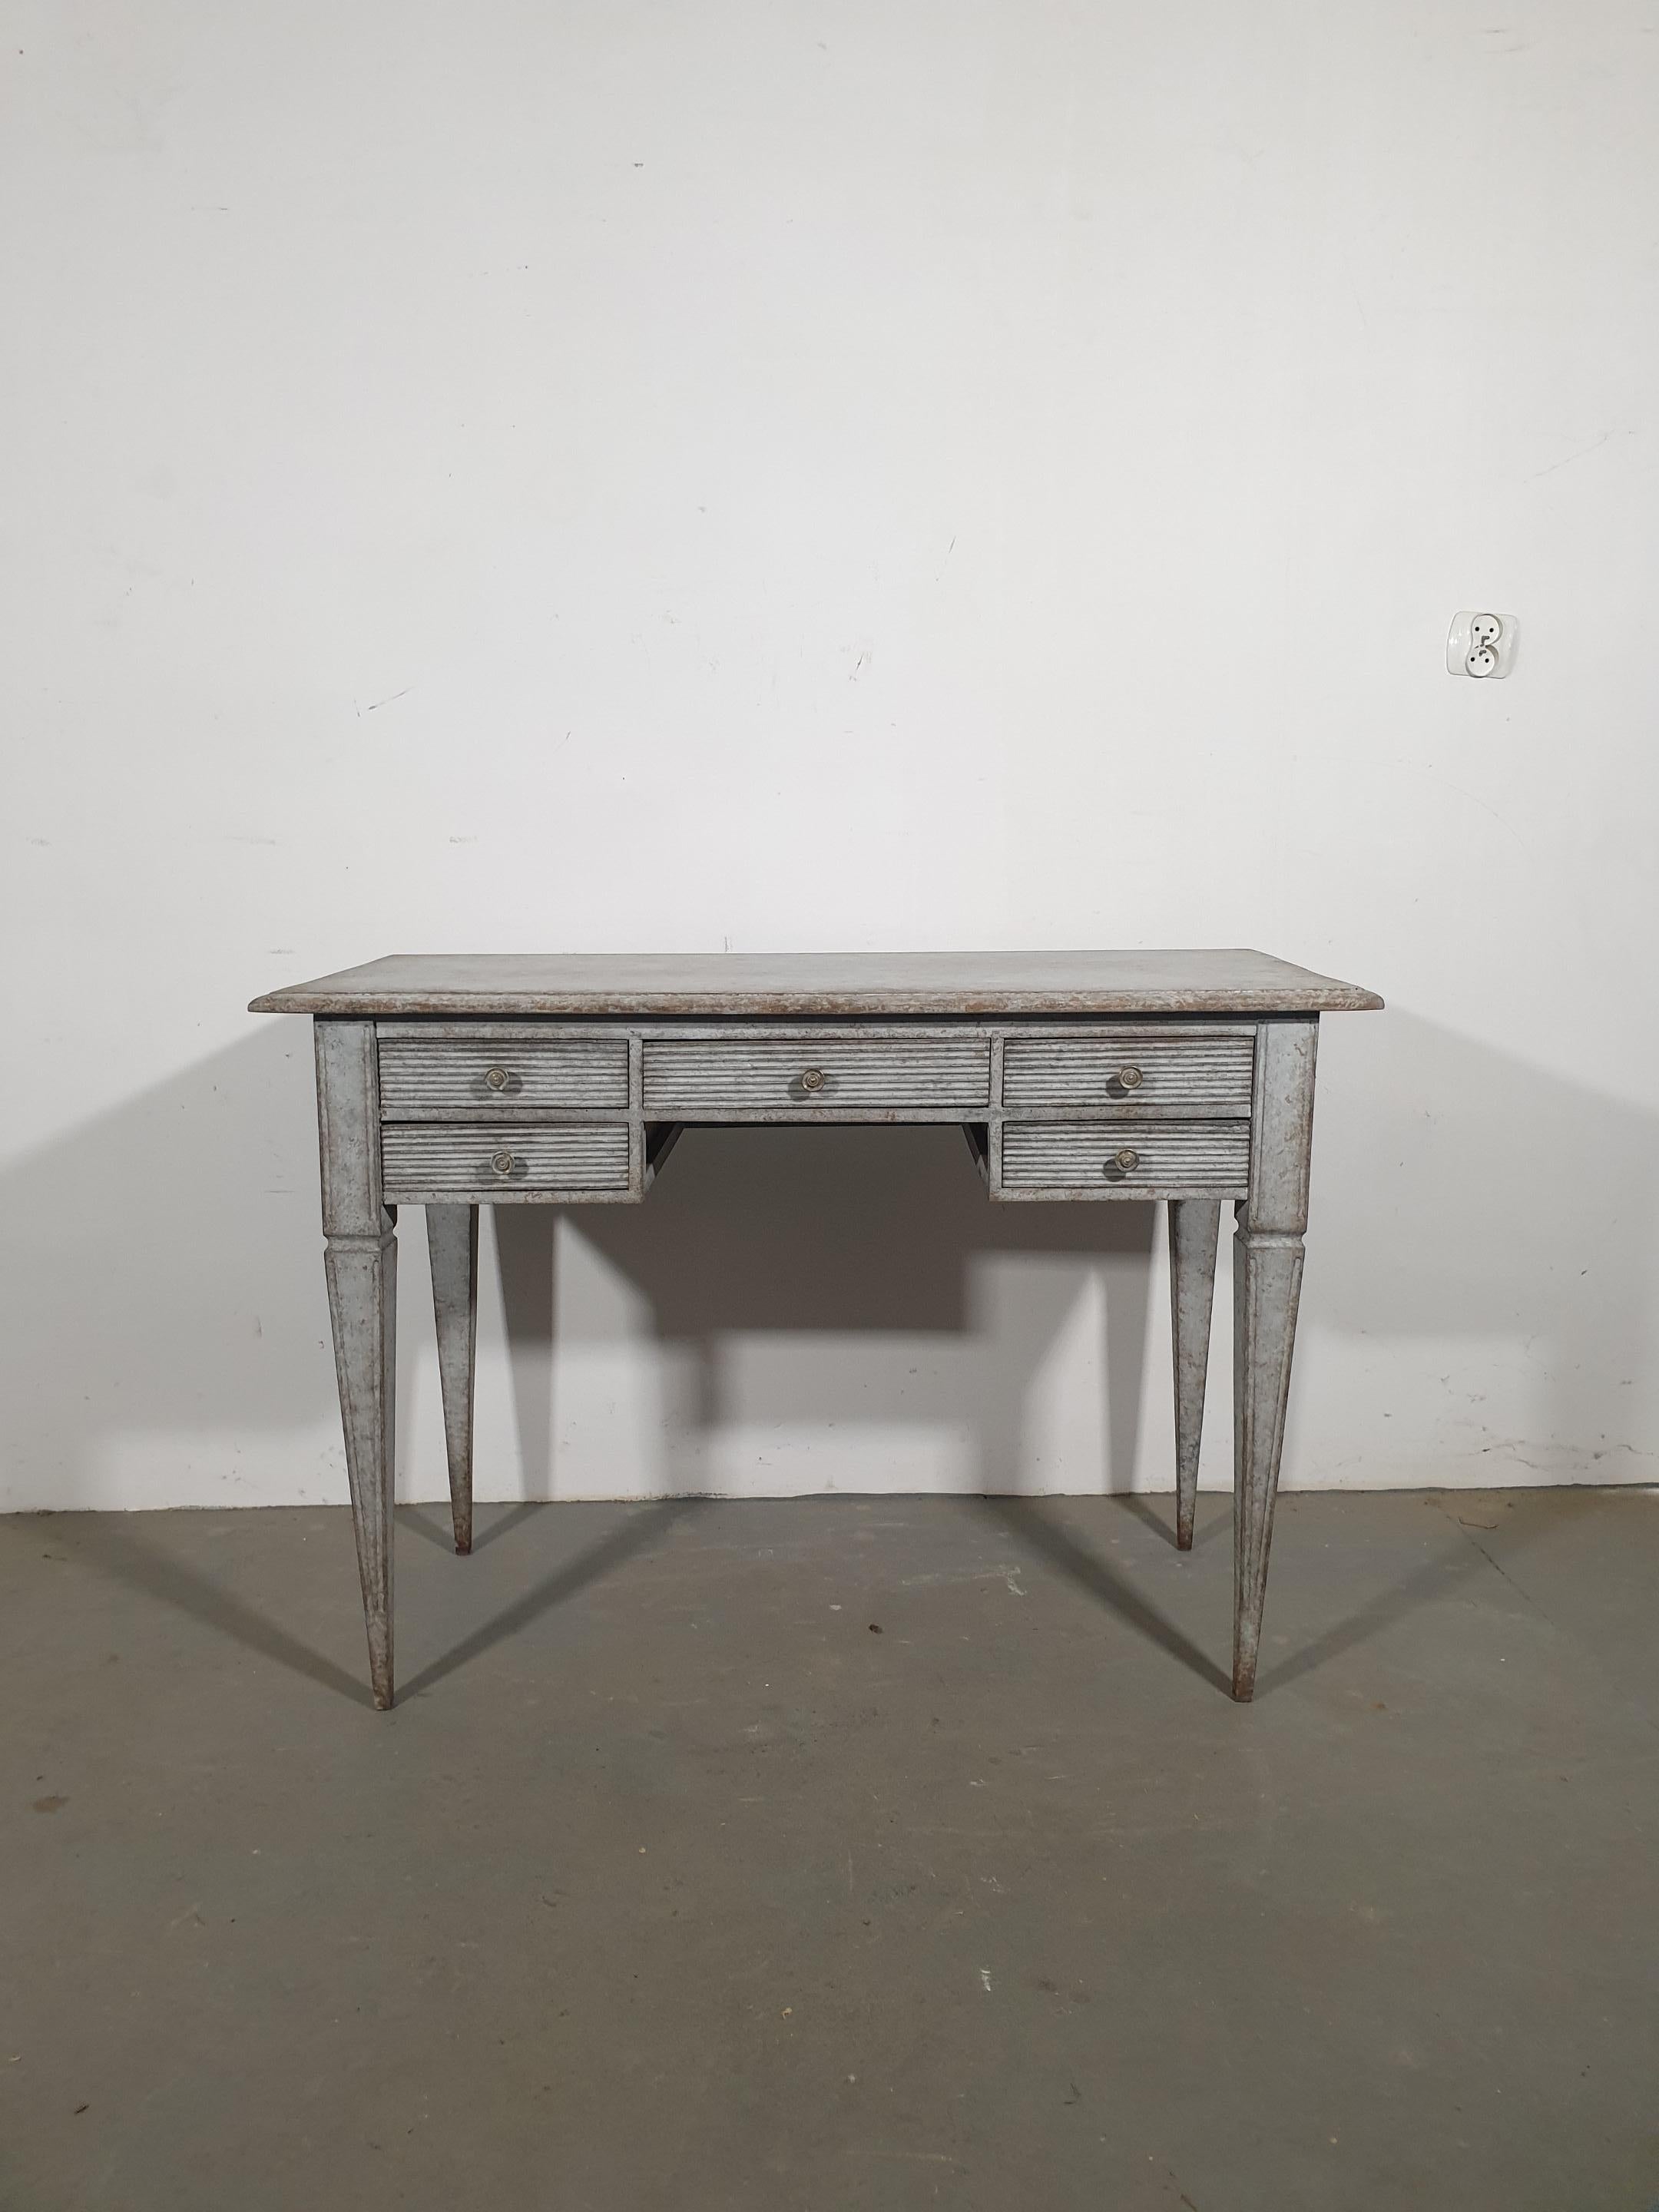 A Swedish Gustavian style gray blue painted desk from circa 1870 with five fluted drawers and tapered legs. Step back in time with this exquisite Swedish Gustavian style desk, dating back to circa 1870. Finished in a cool gray blue hue with quite a